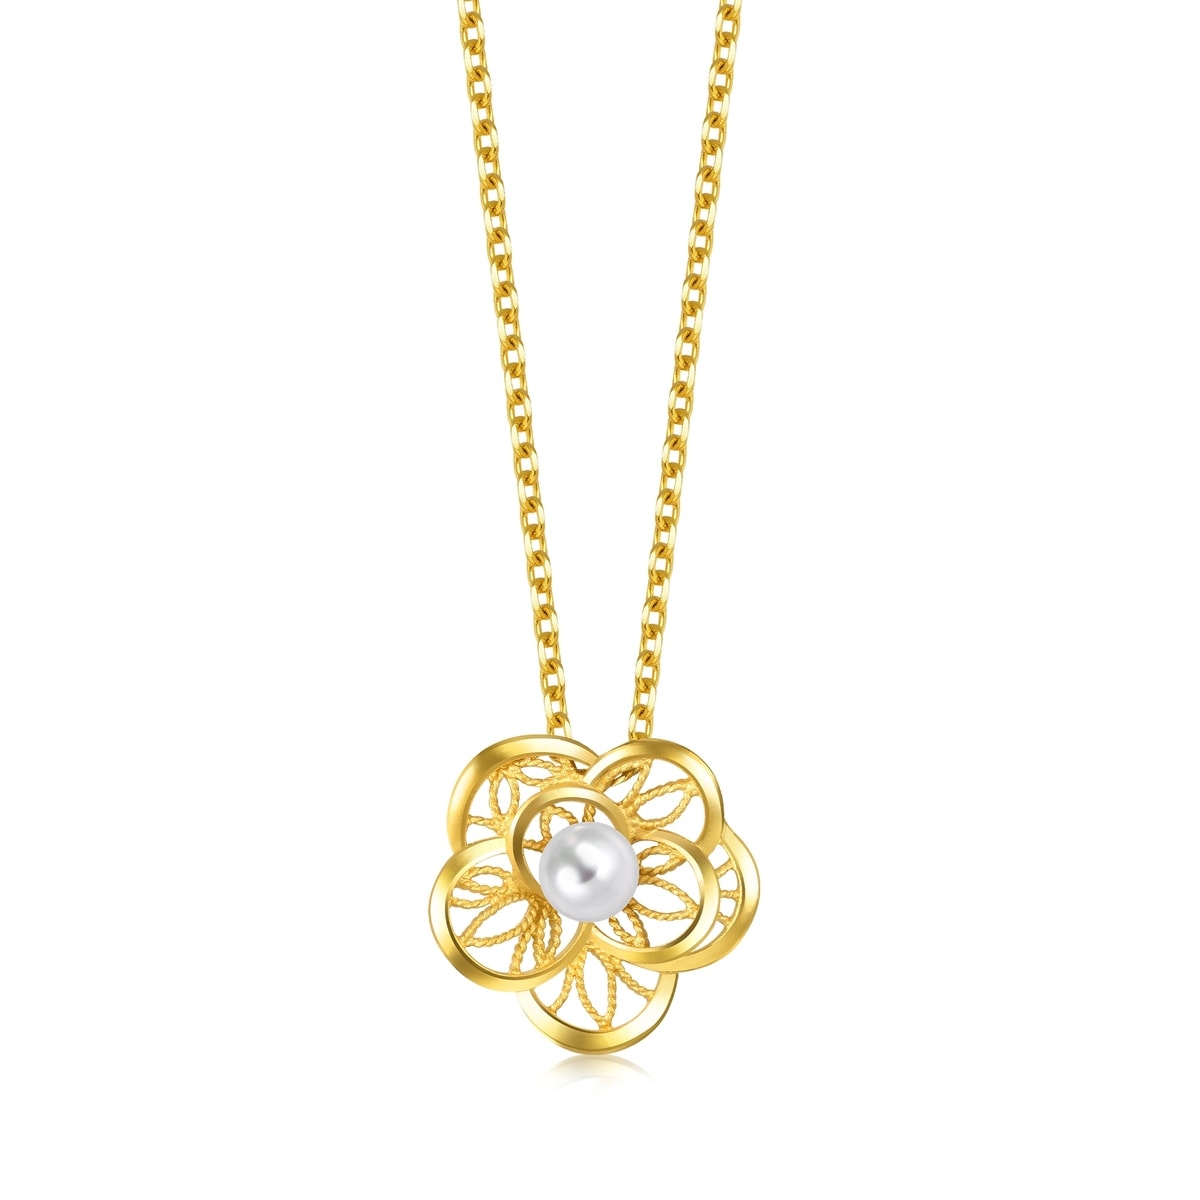 Lace 999.9 Gold Pendant - 92013P | Chow Sang Sang Jewellery